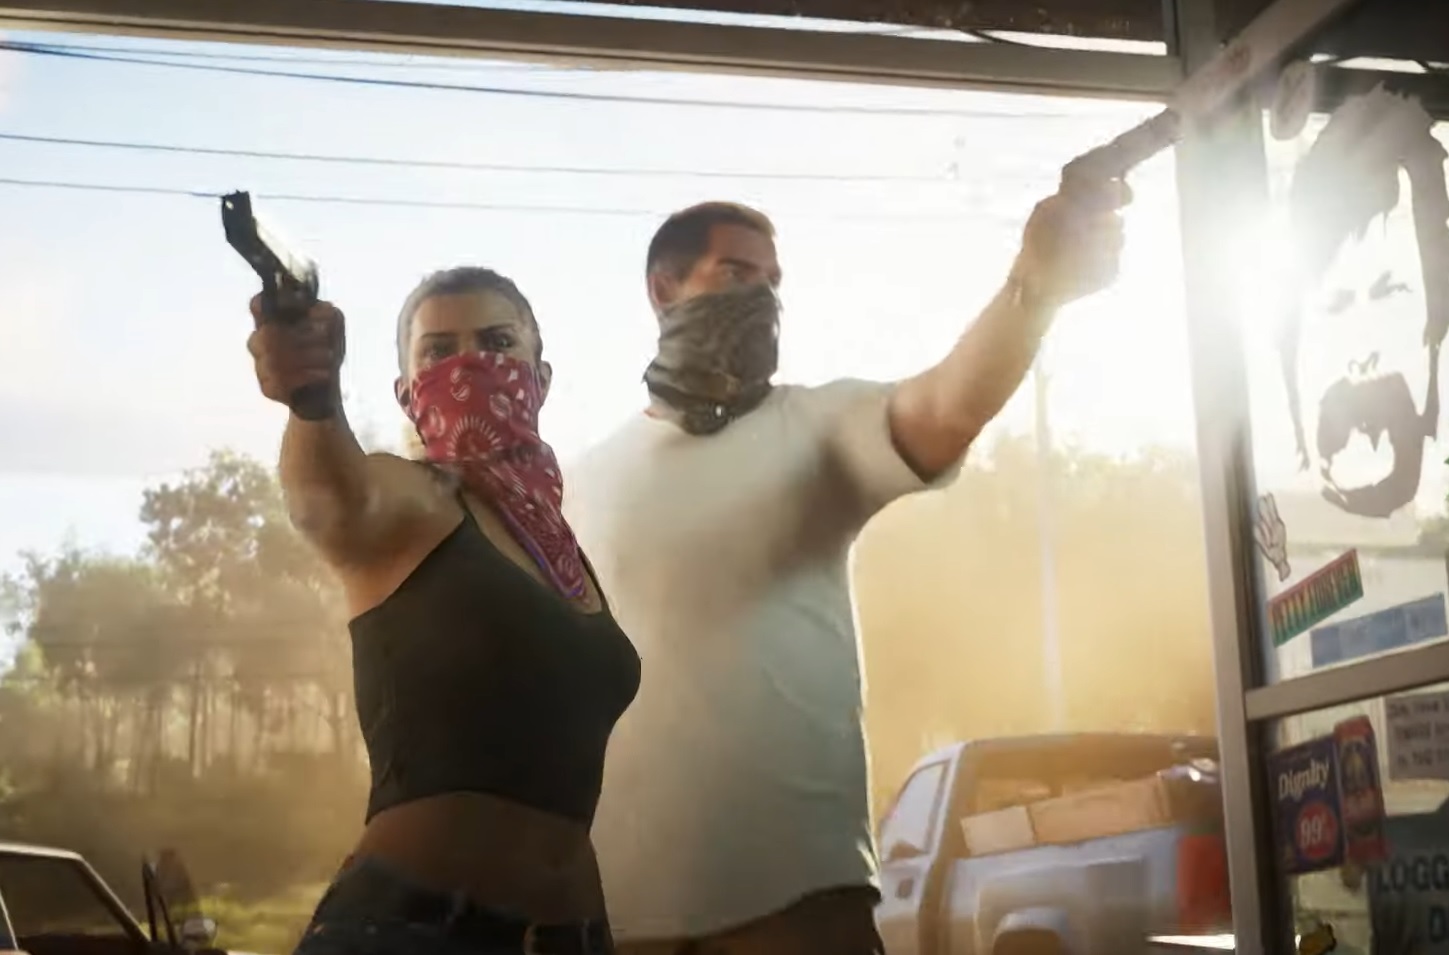 GTA 6 trailer leaves fans 'speechless' – but gamers are